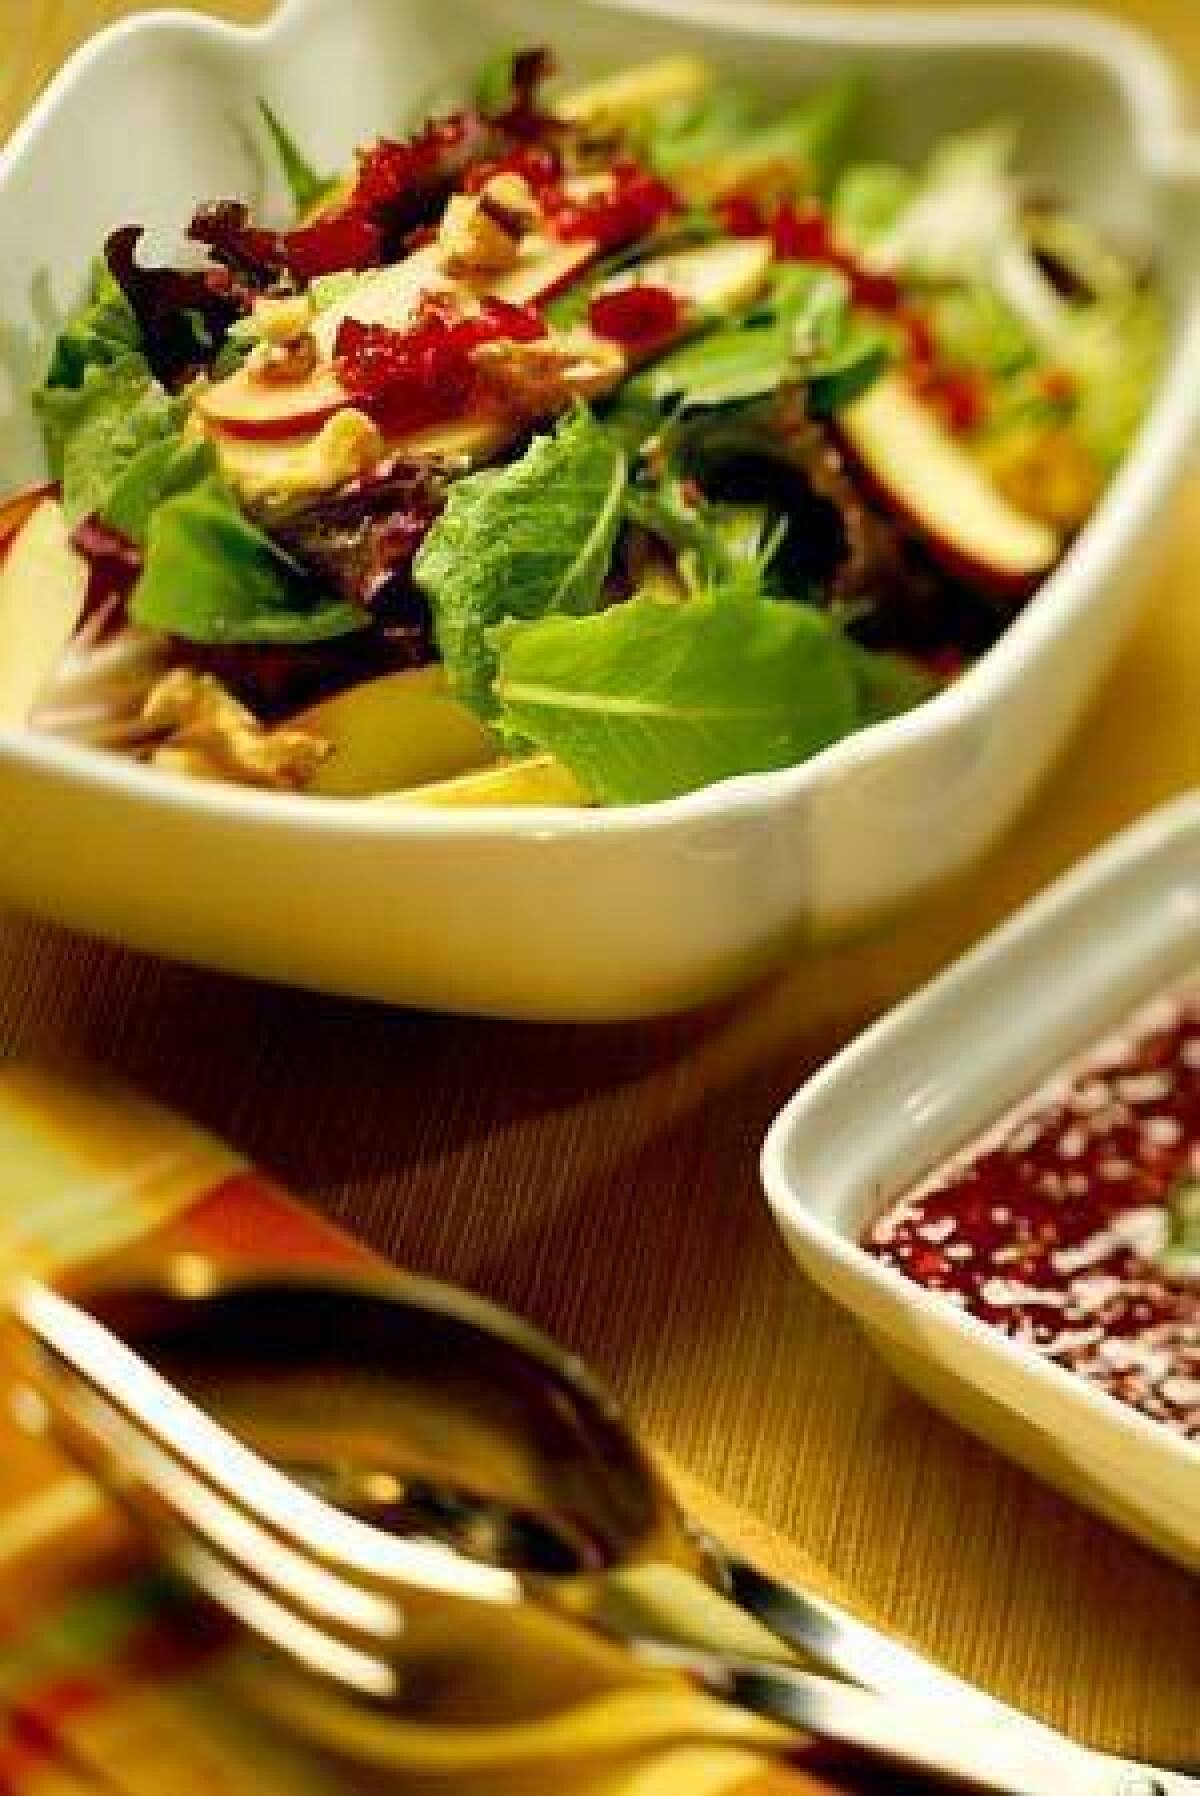 Pear and apple salad with cranberry vinaigrette.